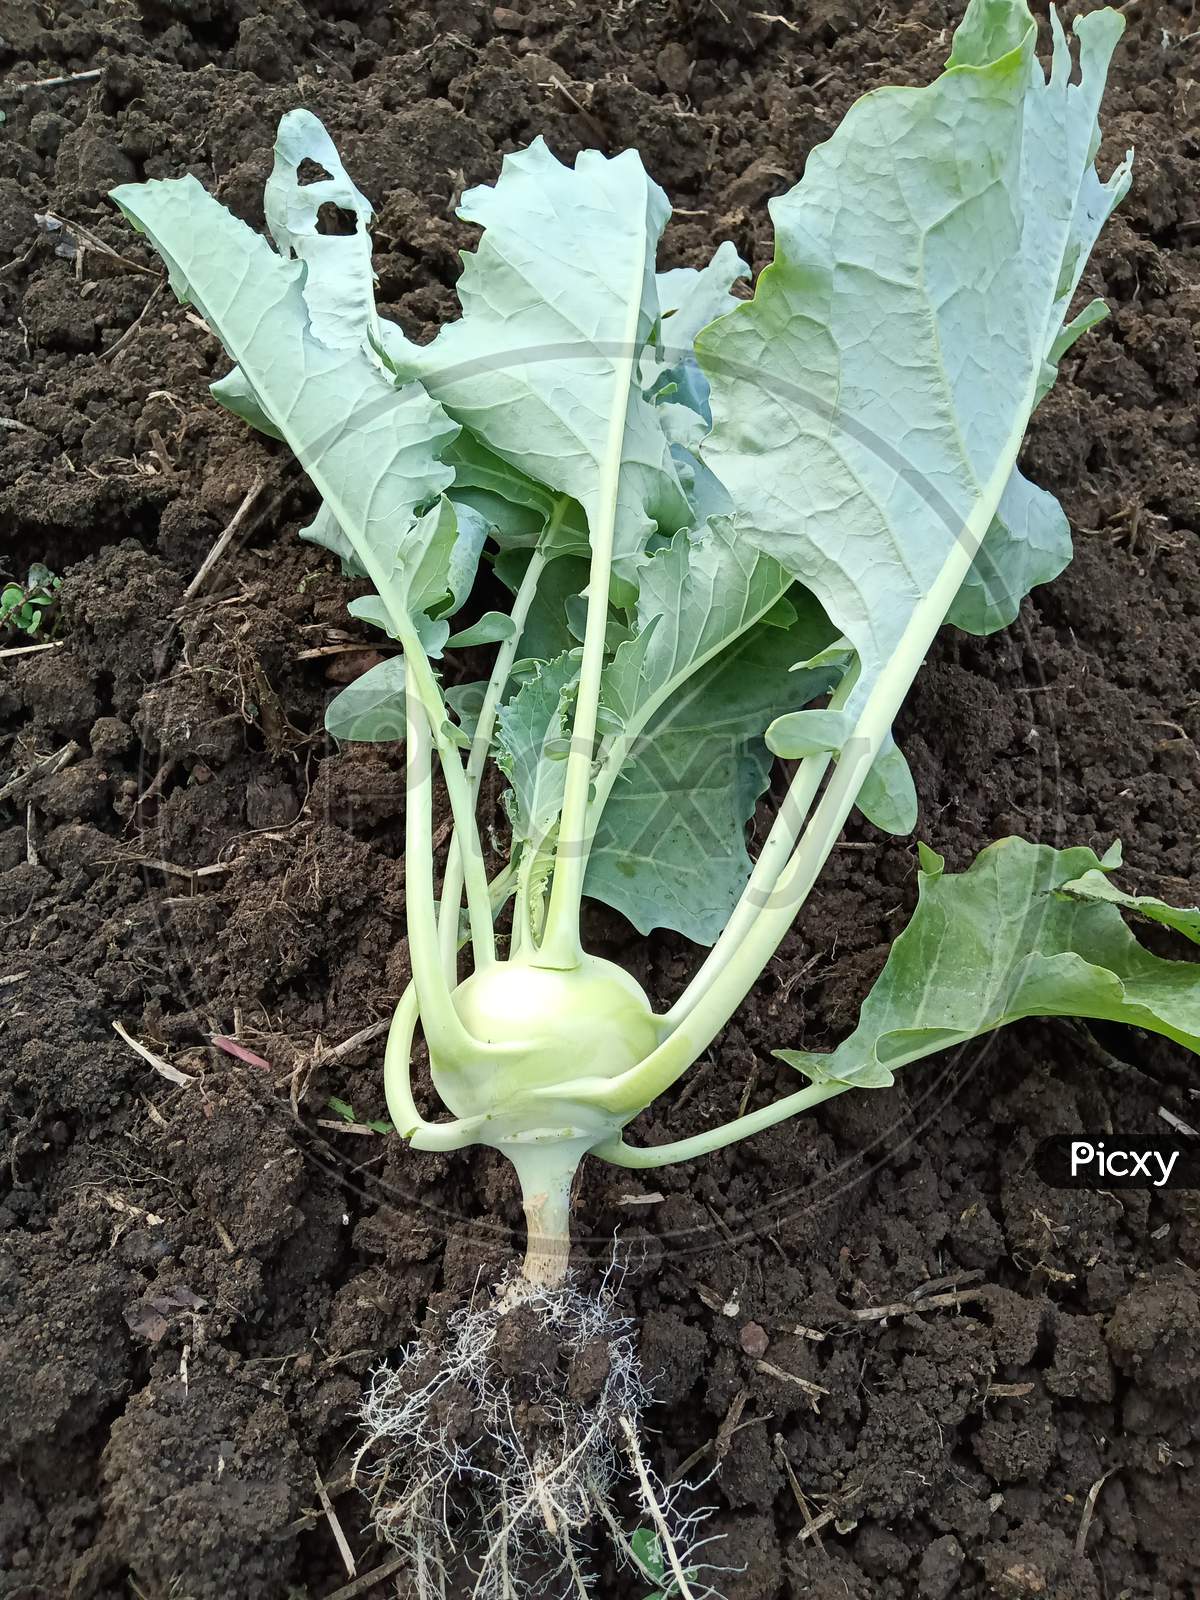 Kohlrabi farms are used for sale in the market